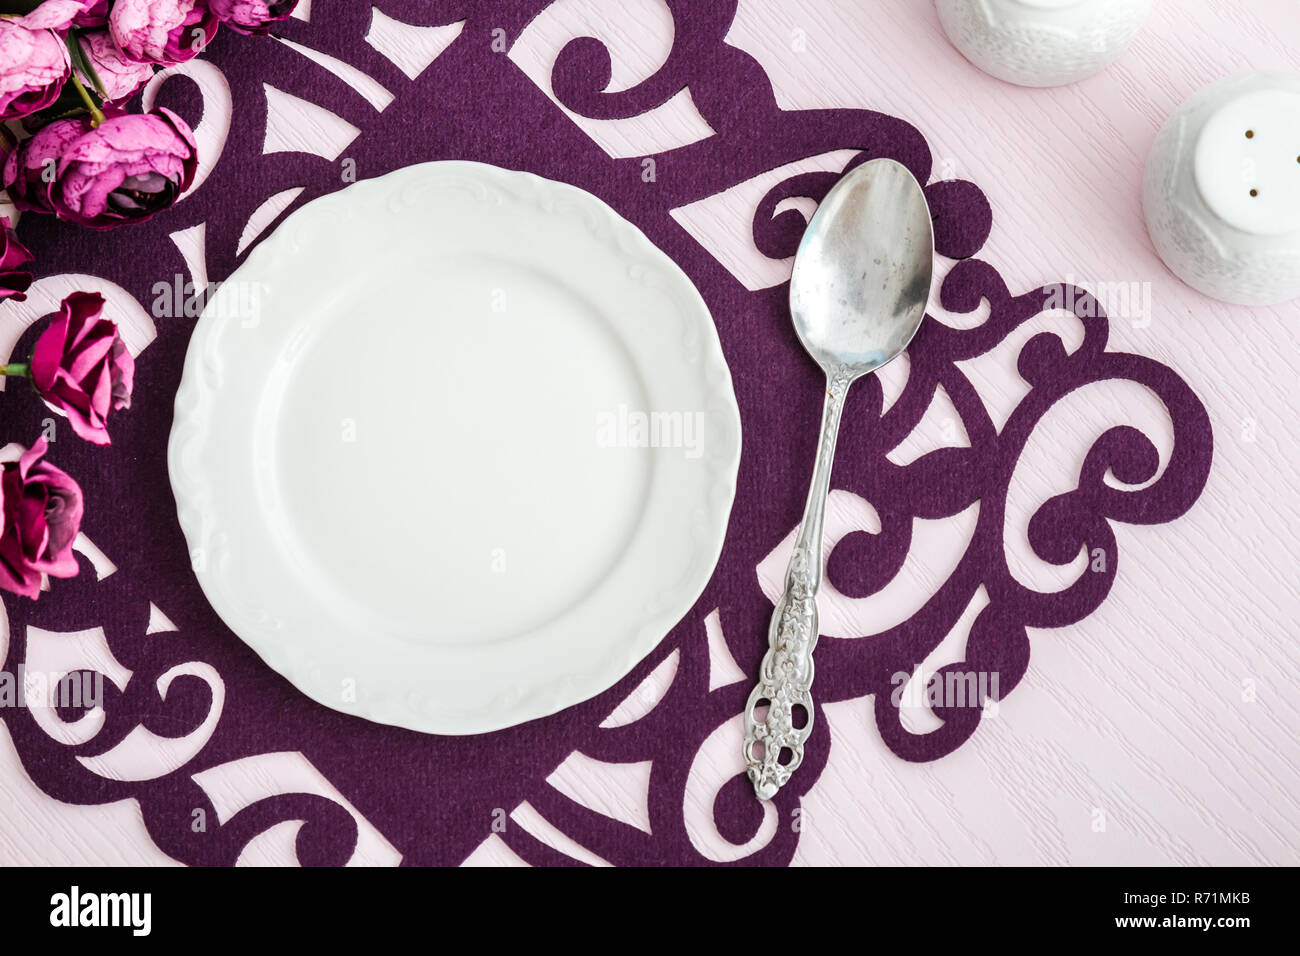 Dinner Table Arranged with Artificial Flowers and Colorful Runners Stock Photo